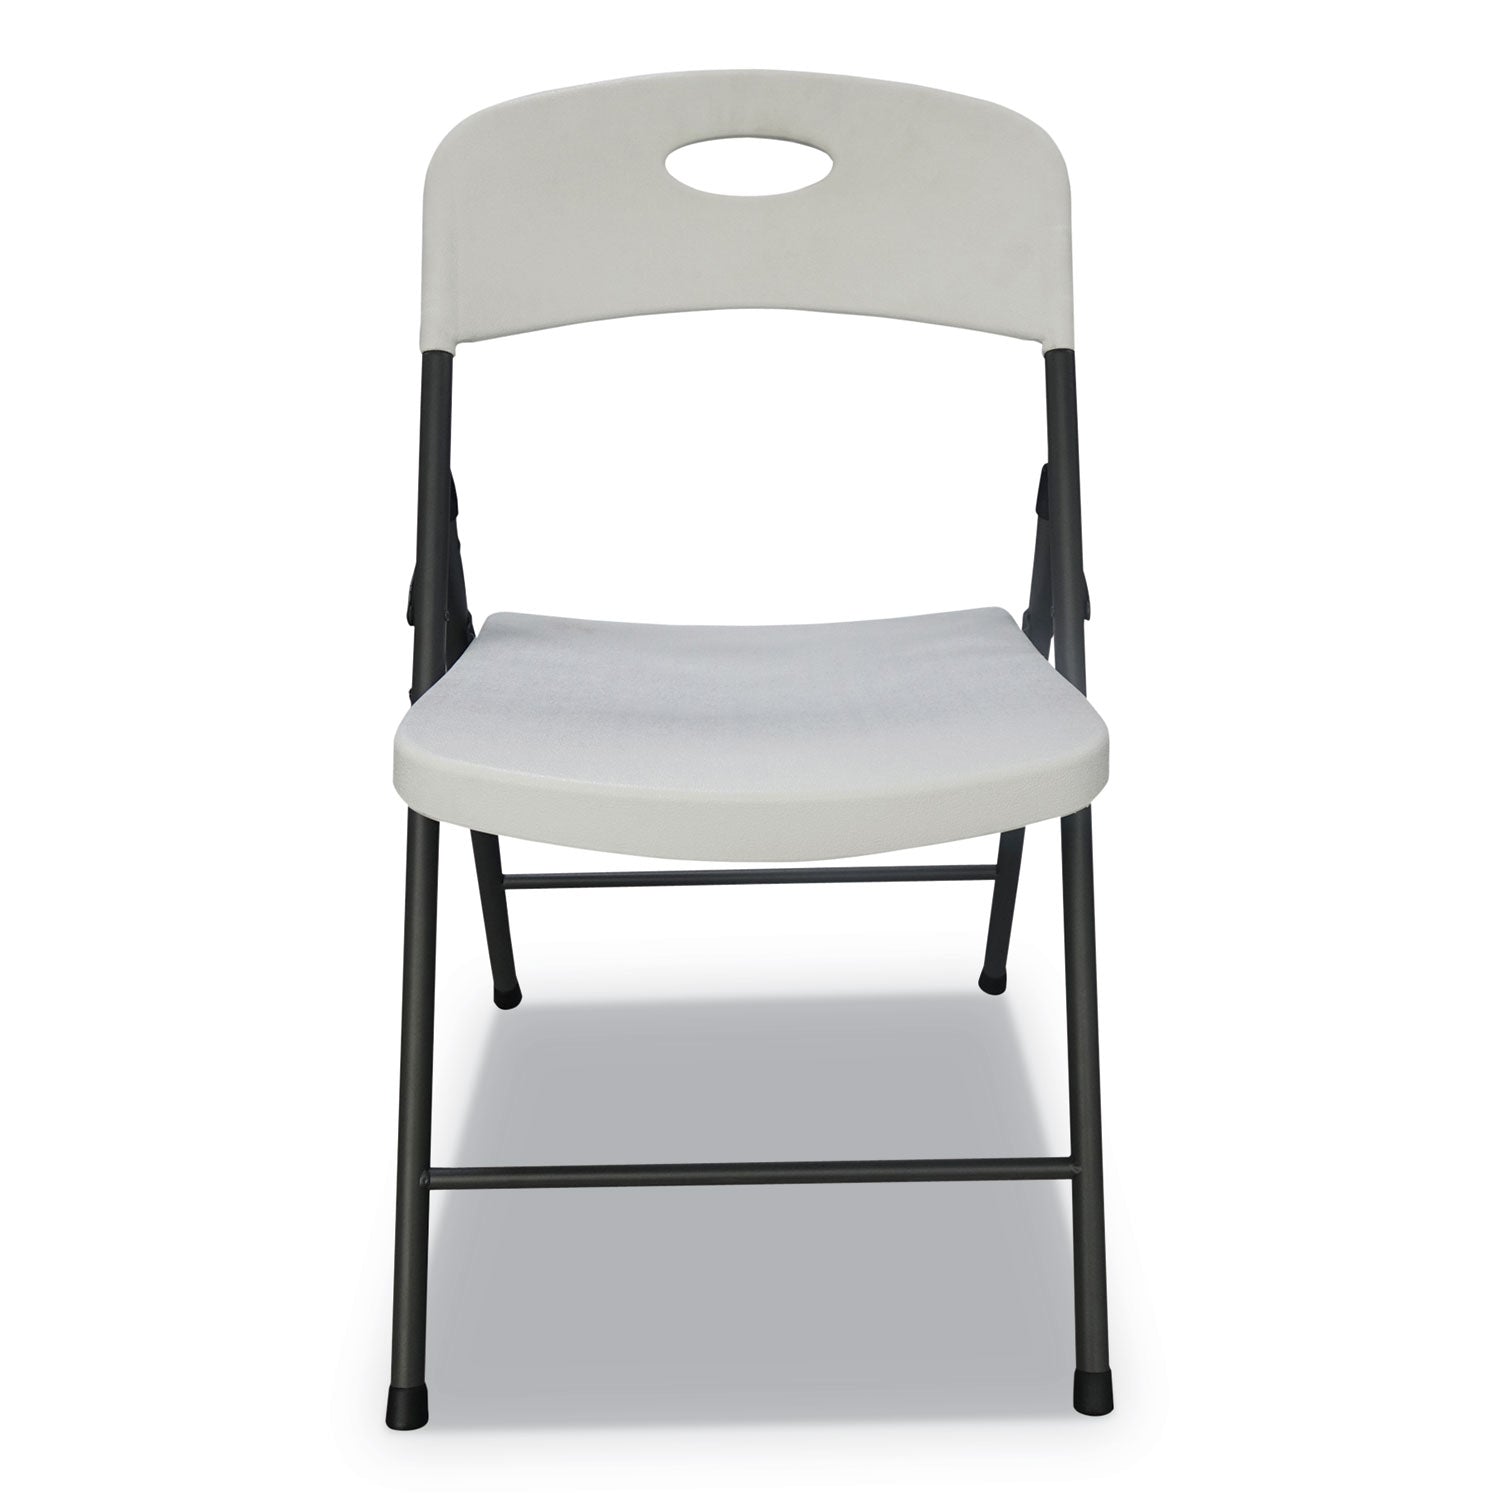 Molded Resin Folding Chair, Supports Up to 225 lb, 18.19" Seat Height, White Seat, White Back, Dark Gray Base, 4/Carton - 